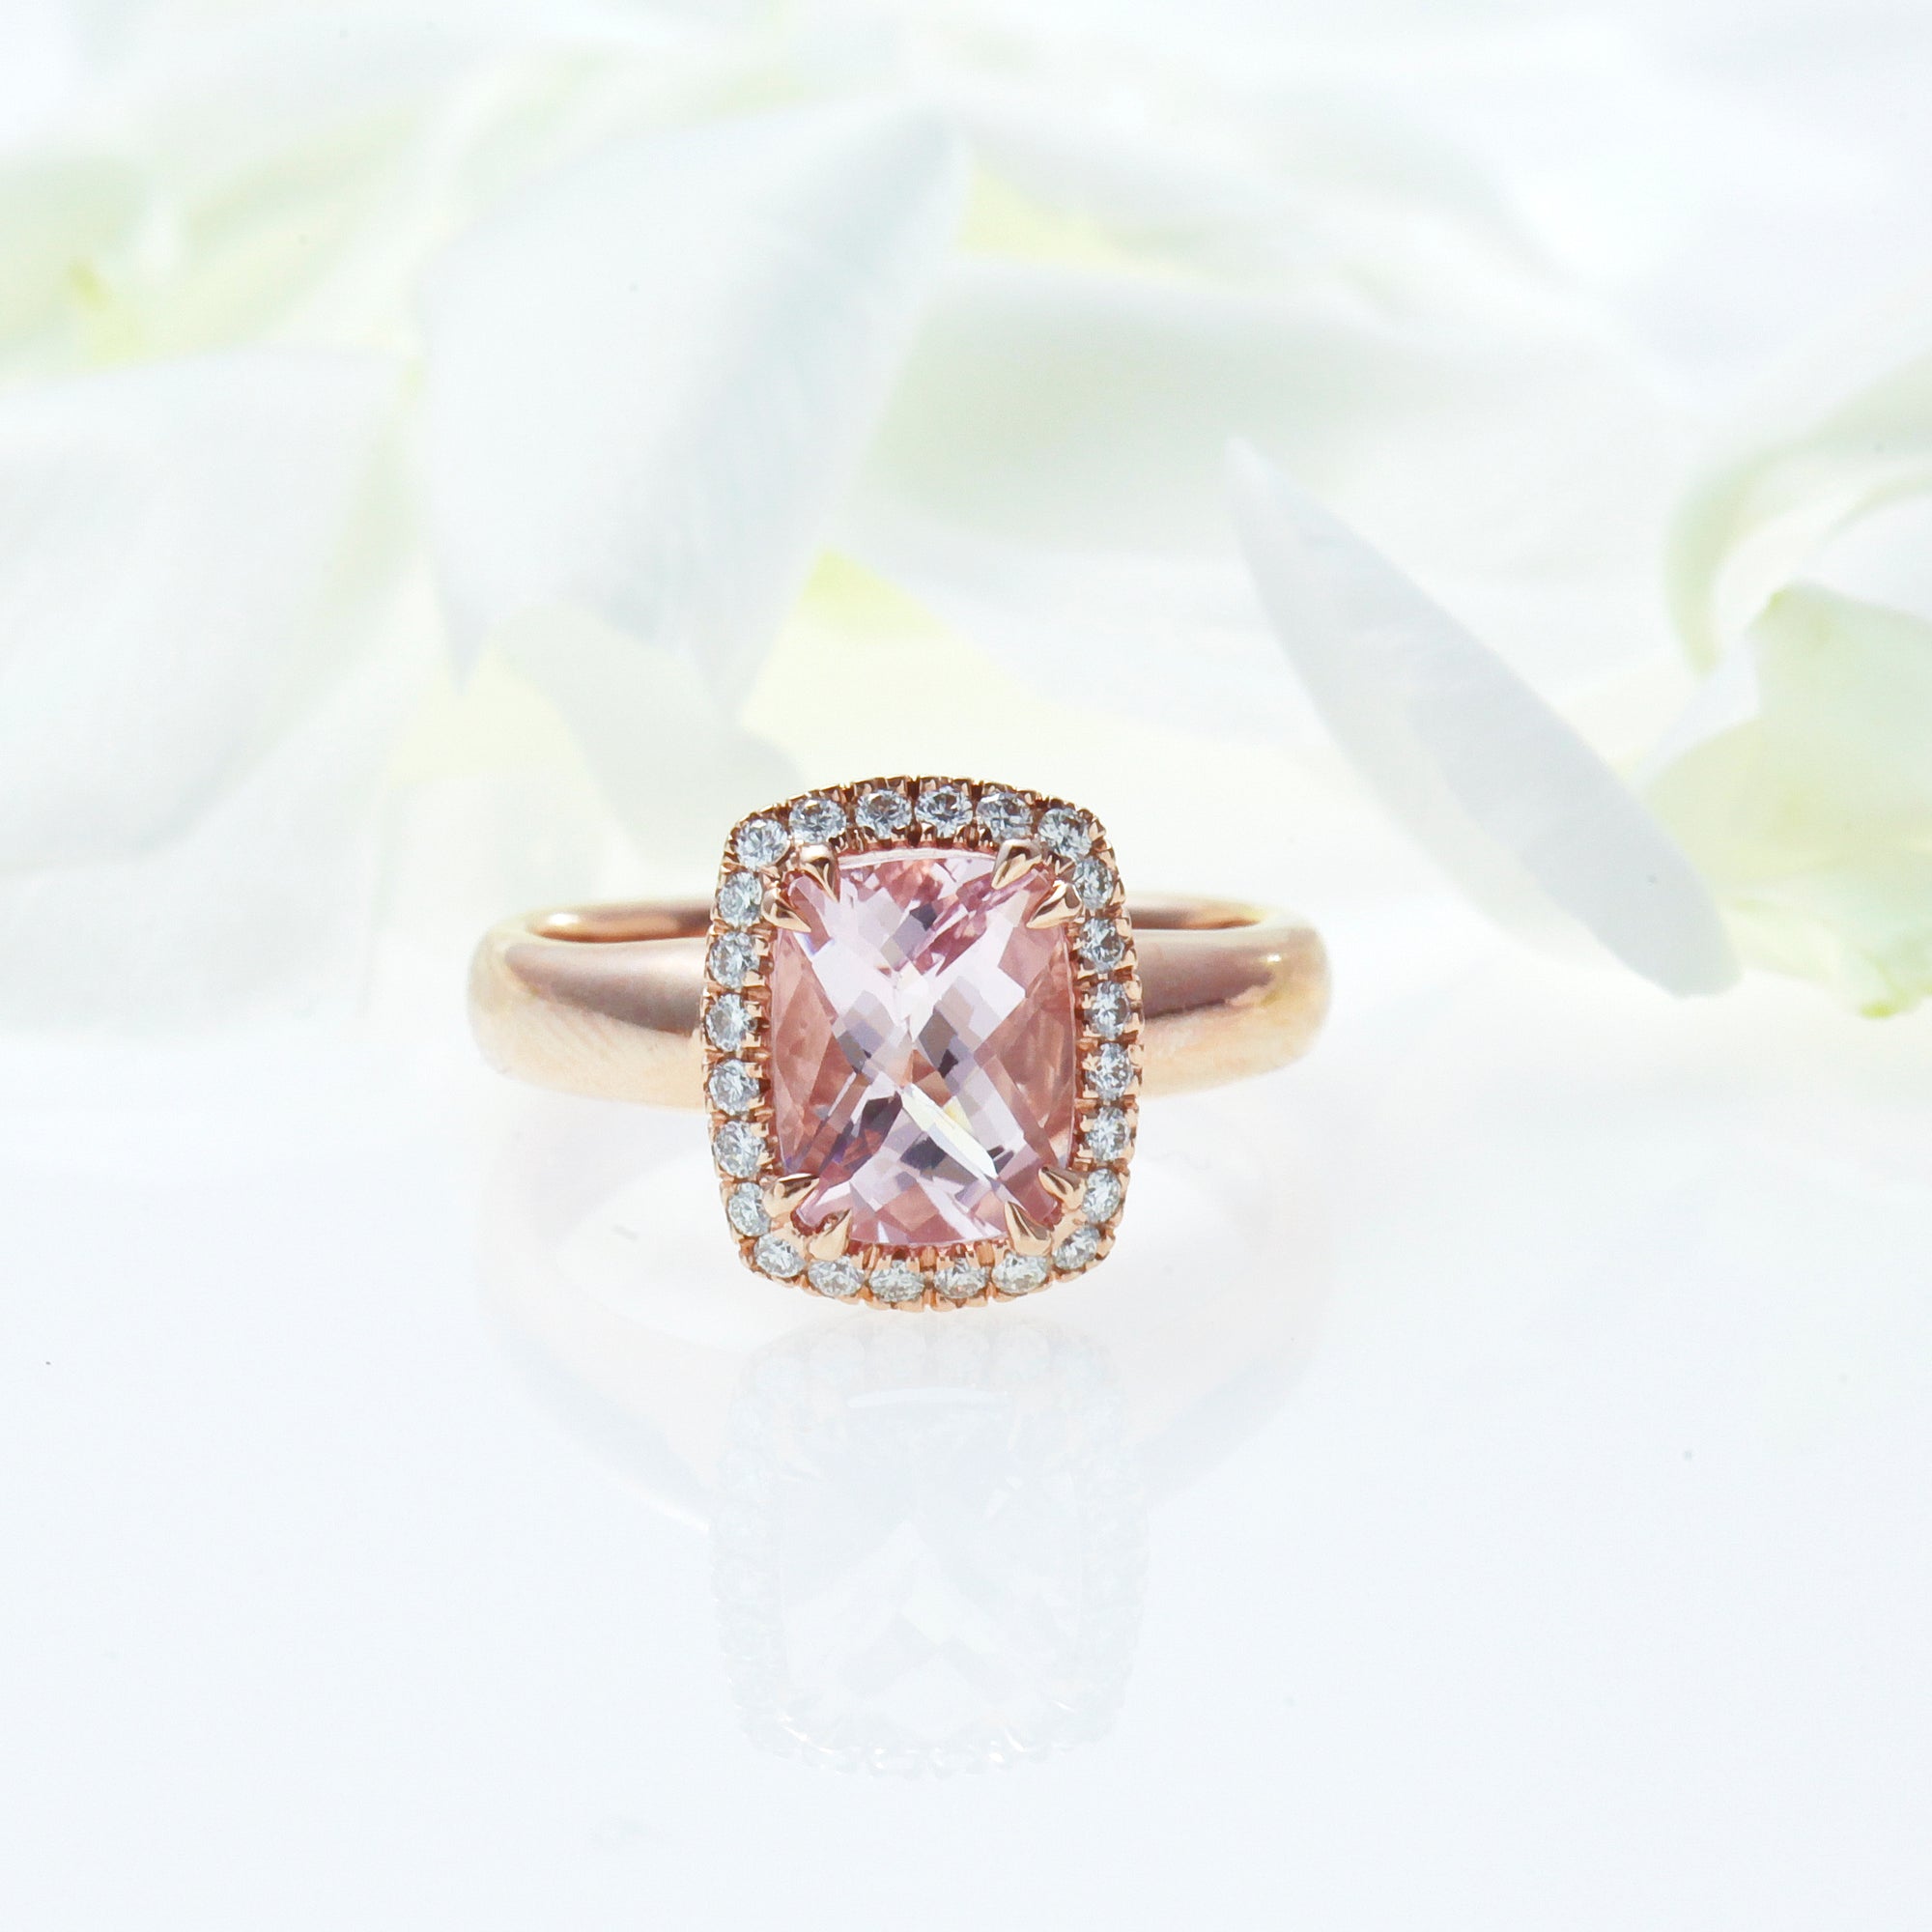 14K pink gold ring with one cushion-cut morganite and diamonds